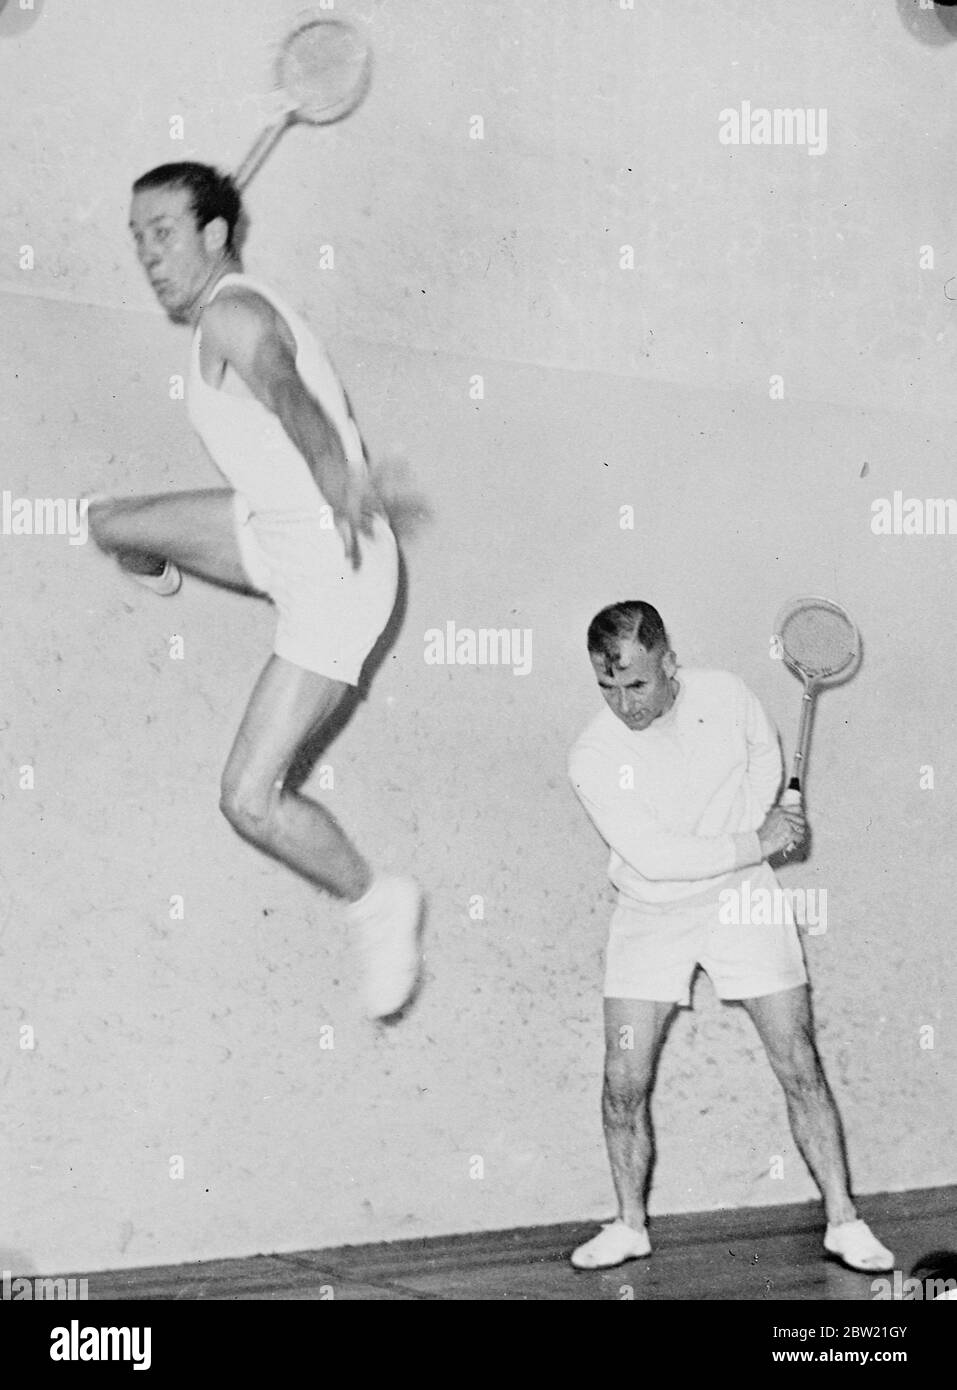 S. M. Kimpton, well-known Australian squash player, emulated the flyby running up a sidewall to make a shot during a match in Melbourne. The other player is P. W. Peers 30 August 1937 Stock Photo